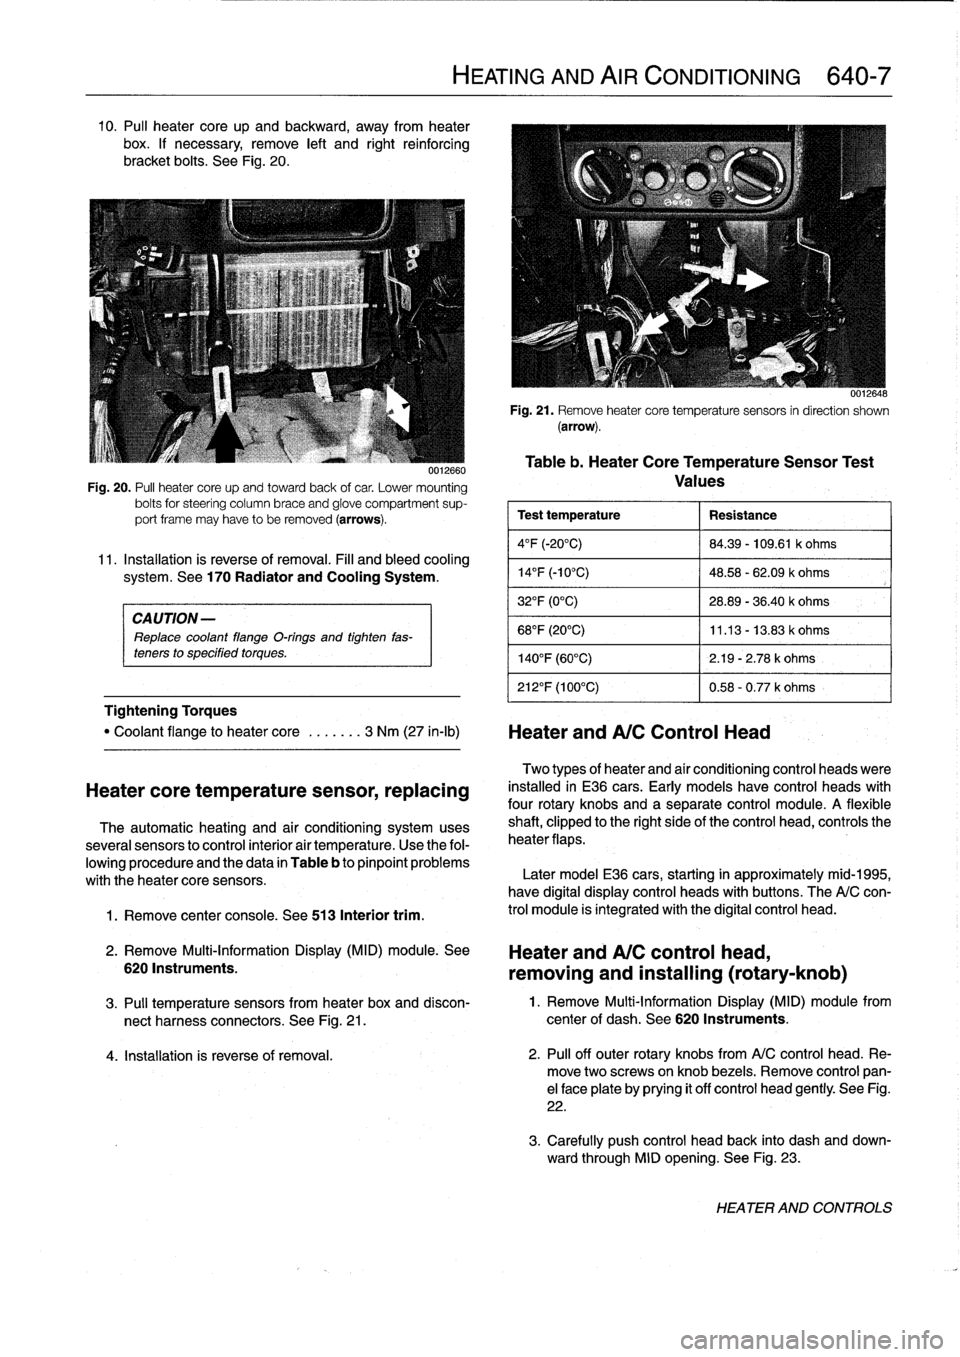 BMW 318i 1998 E36 Owners Manual 10
.
Pul¡
heater
core
up
and
backward,
away
from
heater
box
.
If
necessary,
remove
left
and
right
reinforcing
bracket
bolts
.
See
Fig
.
20
.

CAUTION-

Replace
coolant
flange
O-rings
and
tighten
fas-